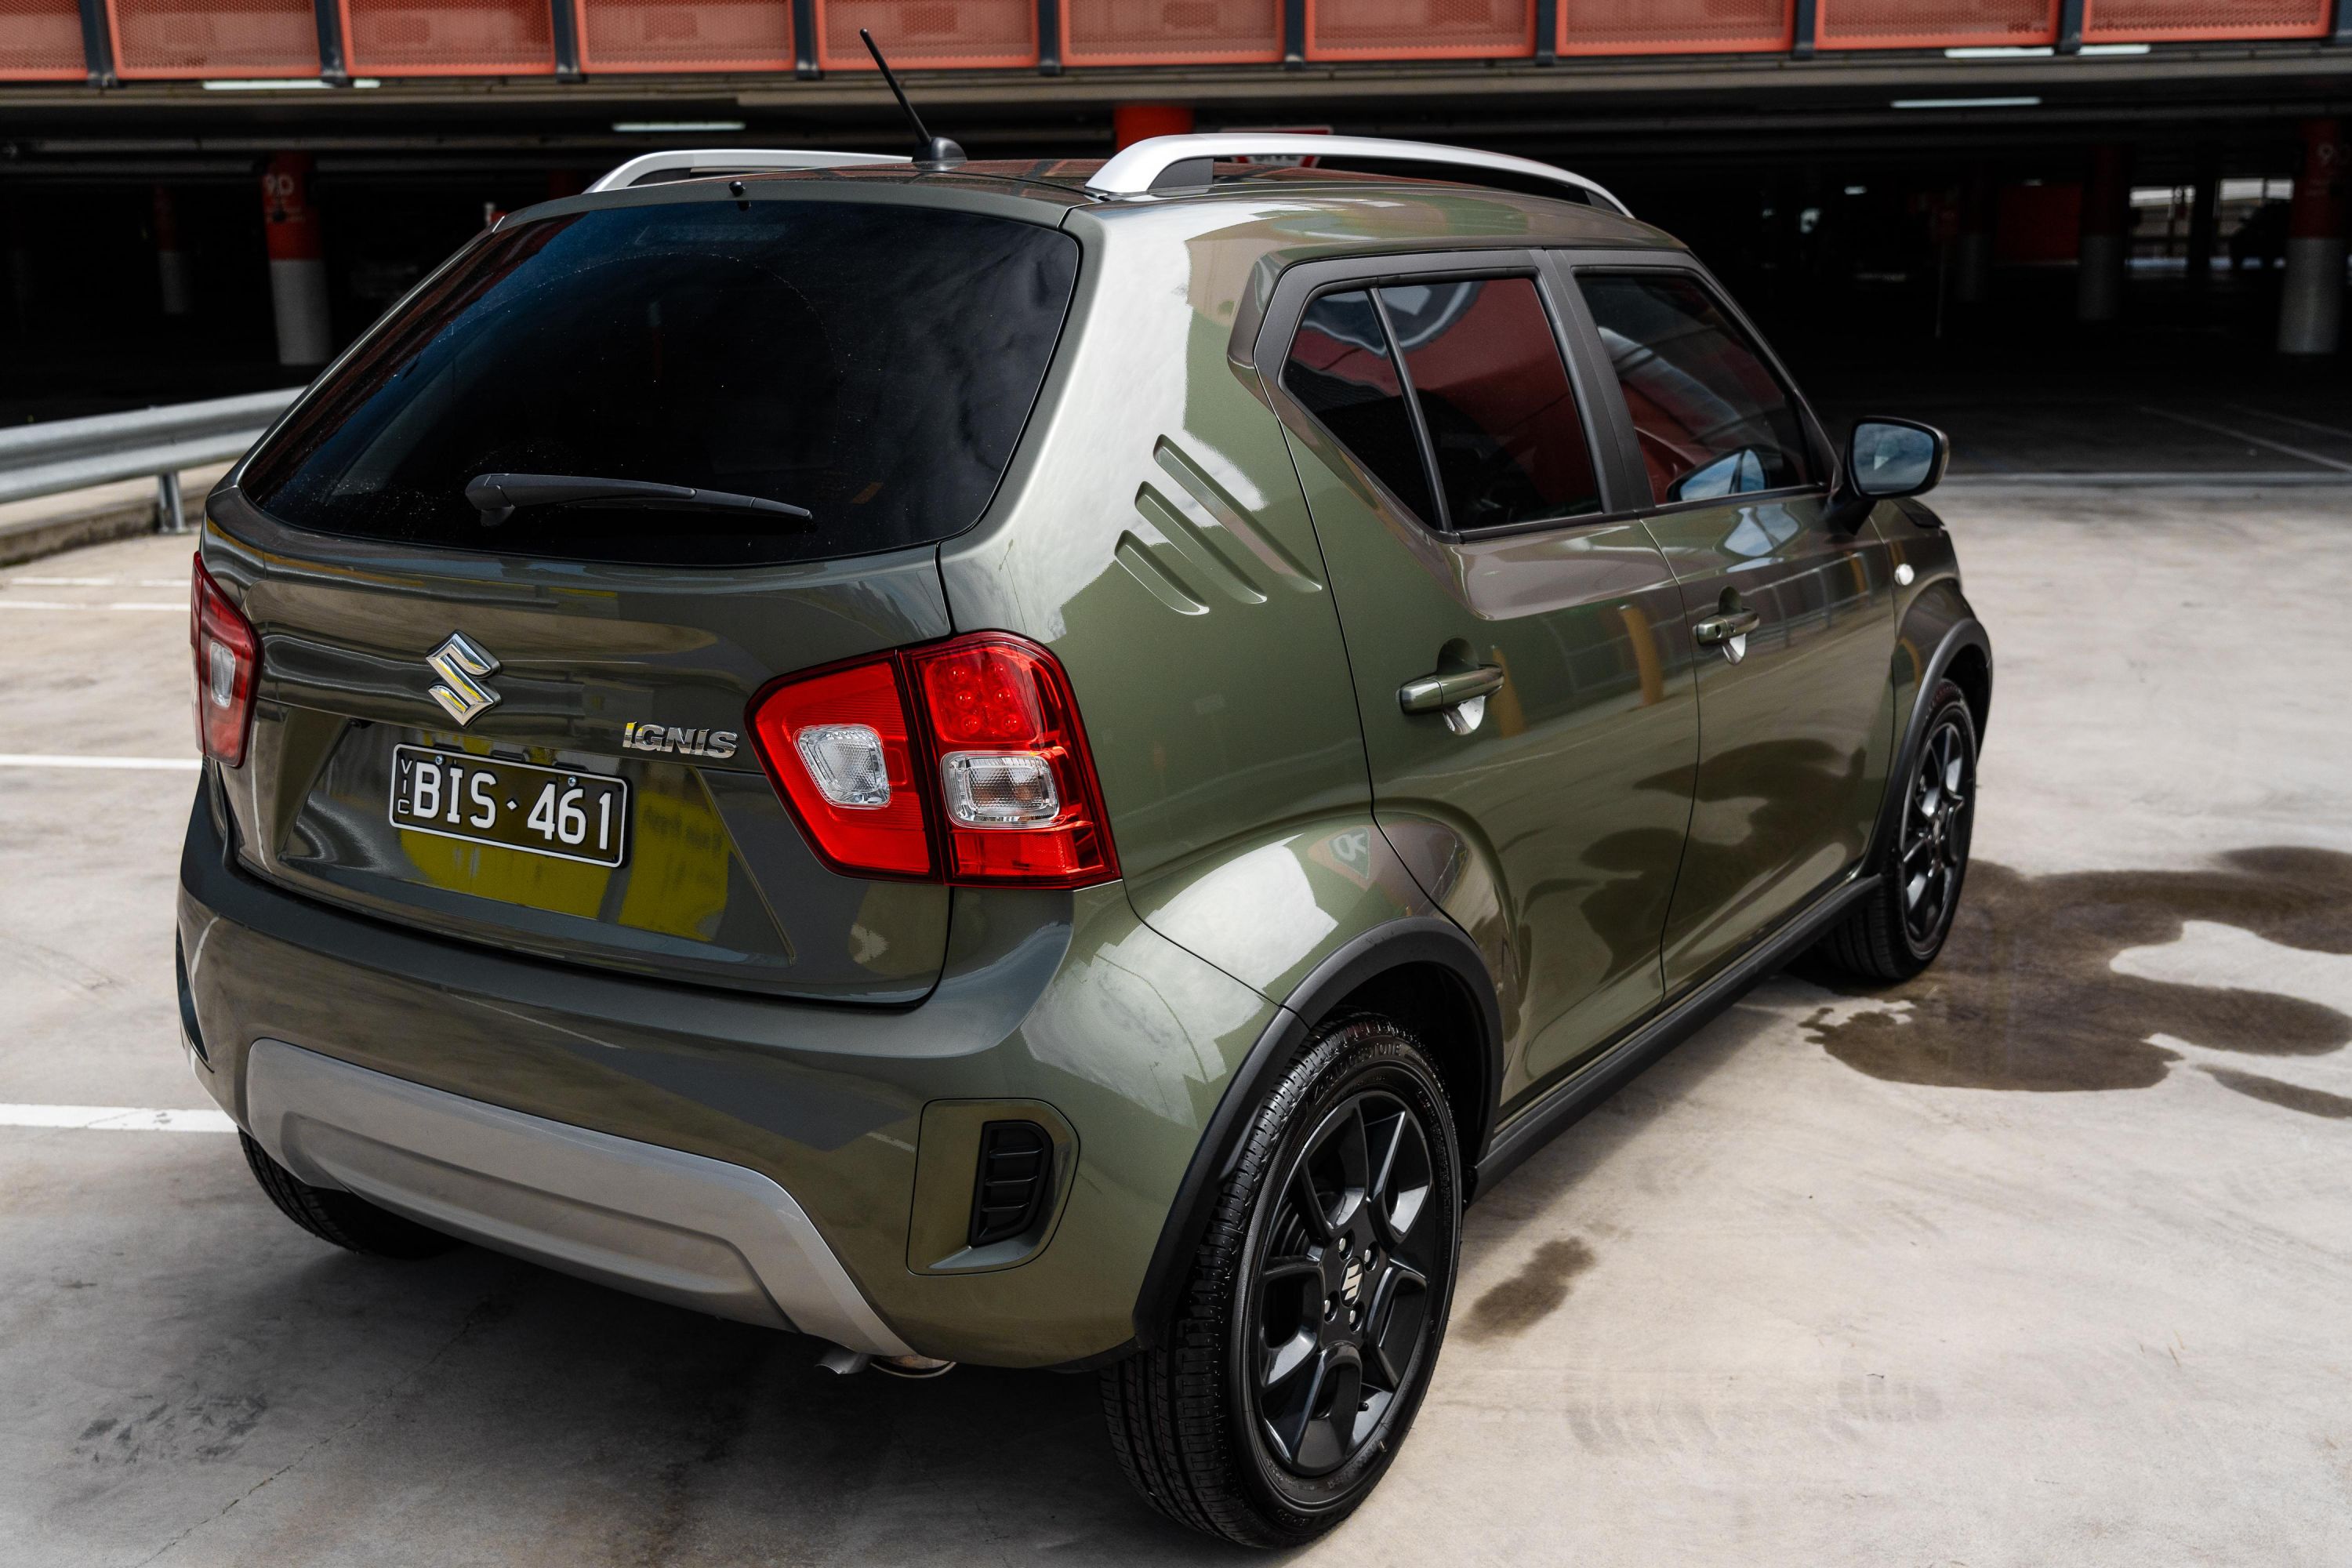 2022 Suzuki Ignis GLX review: The cheapest SUV in Australia? Or just a city  hatch pretending to be butch?